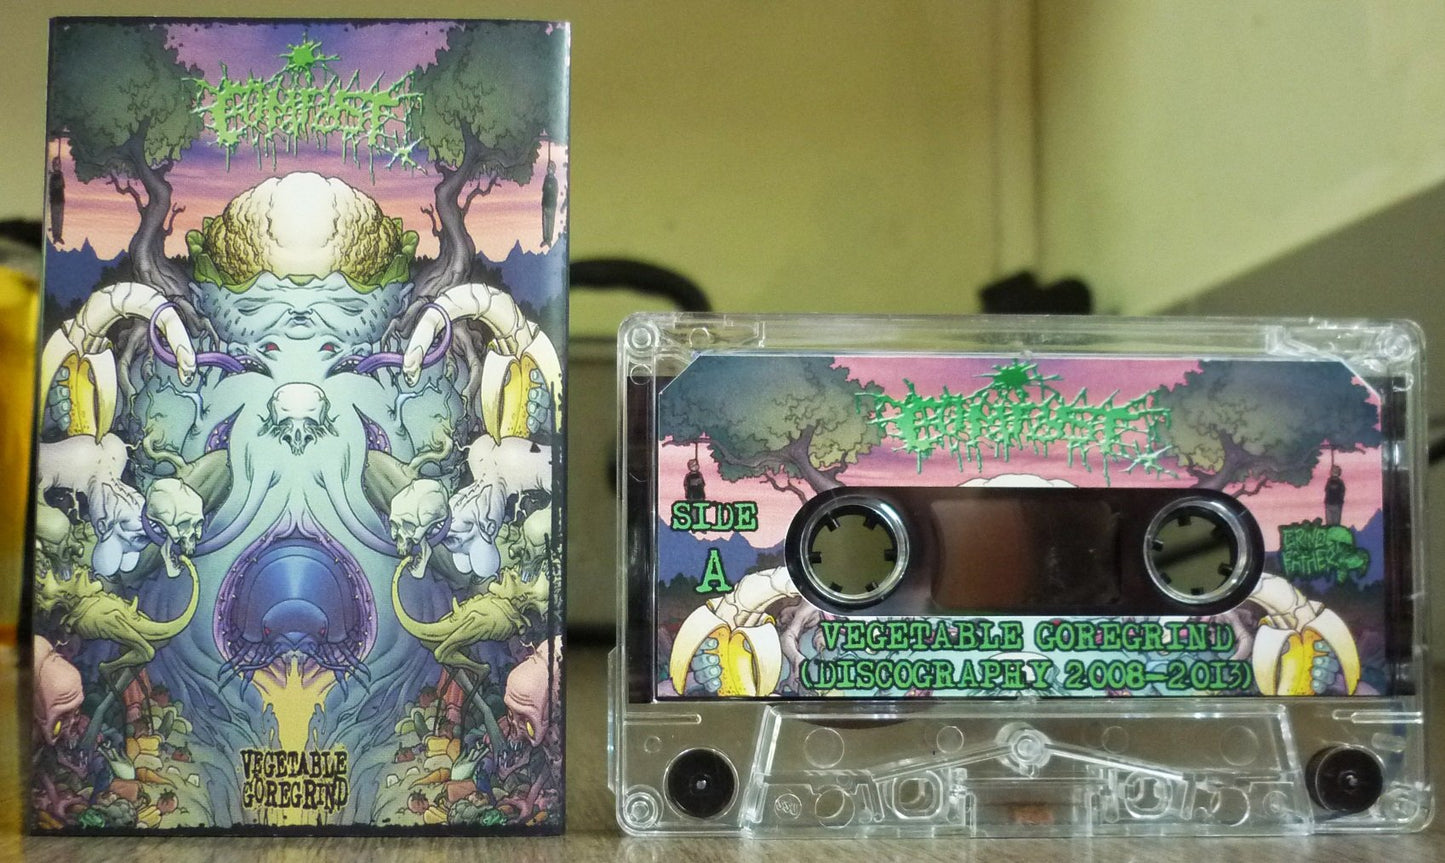 COMPOST - Vegetable Goregrind - DISCOGRAPHY Tape